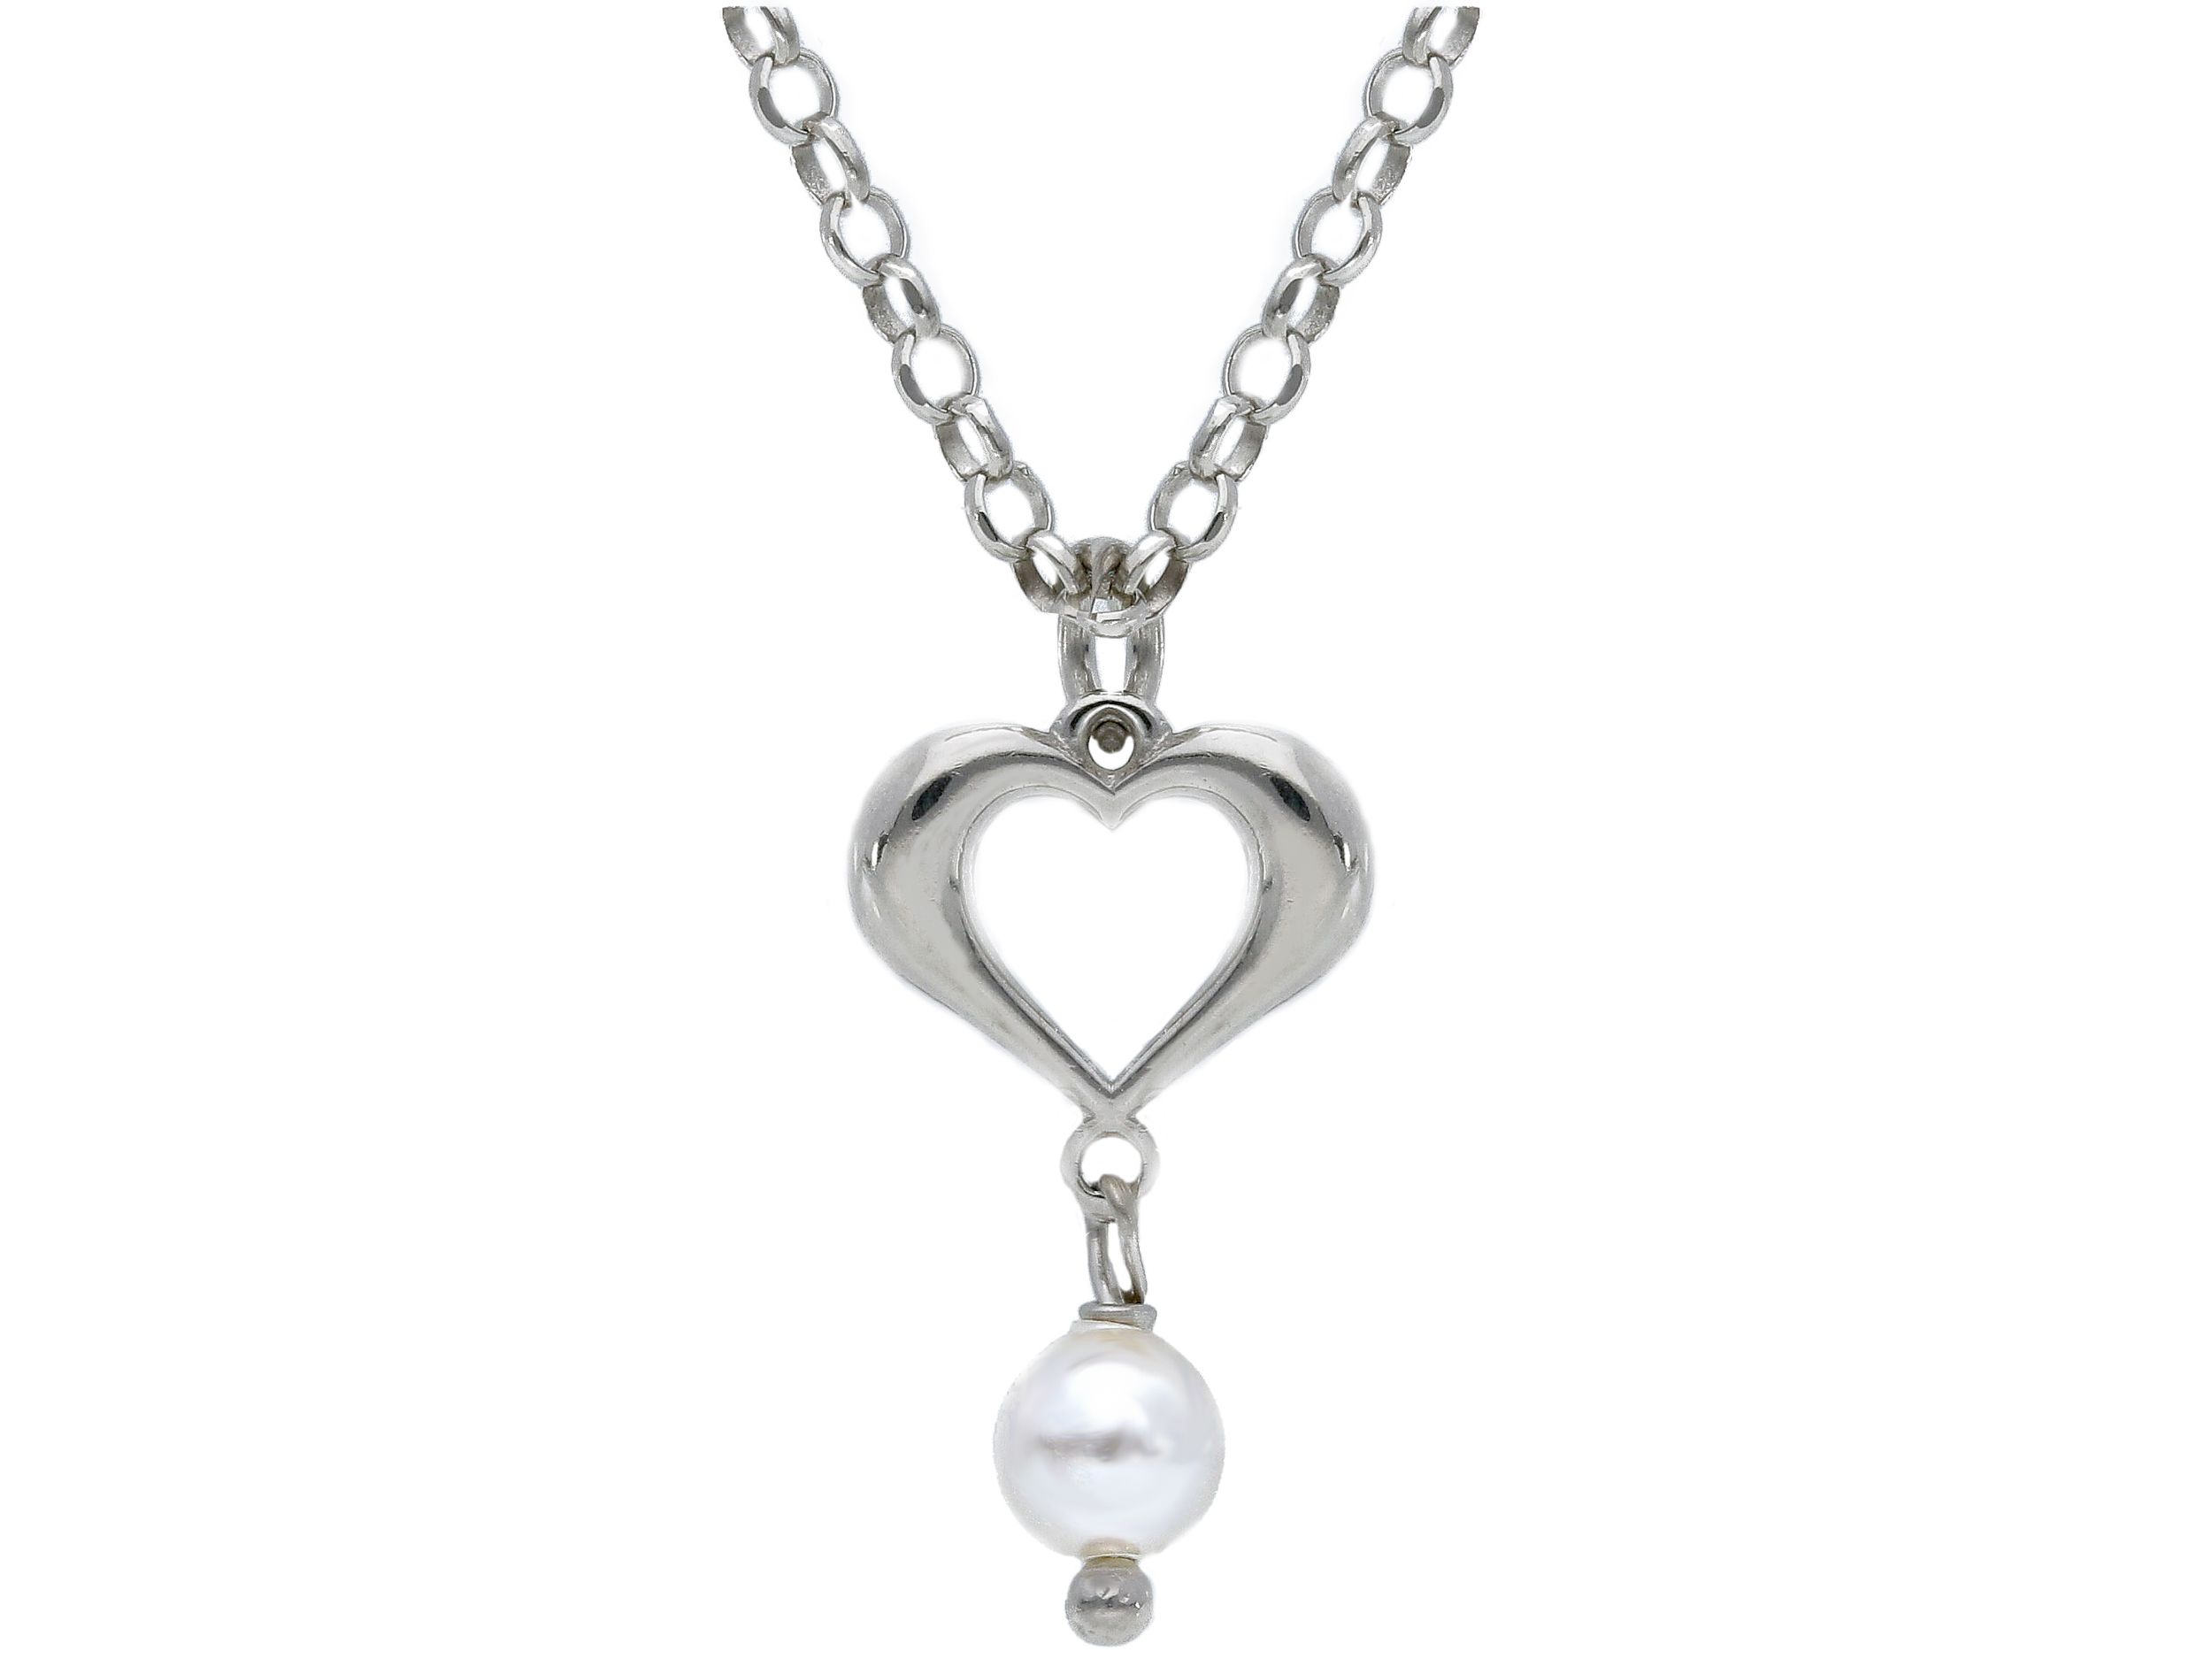   Platinum plated silver 925° heart necklace(code S257348)